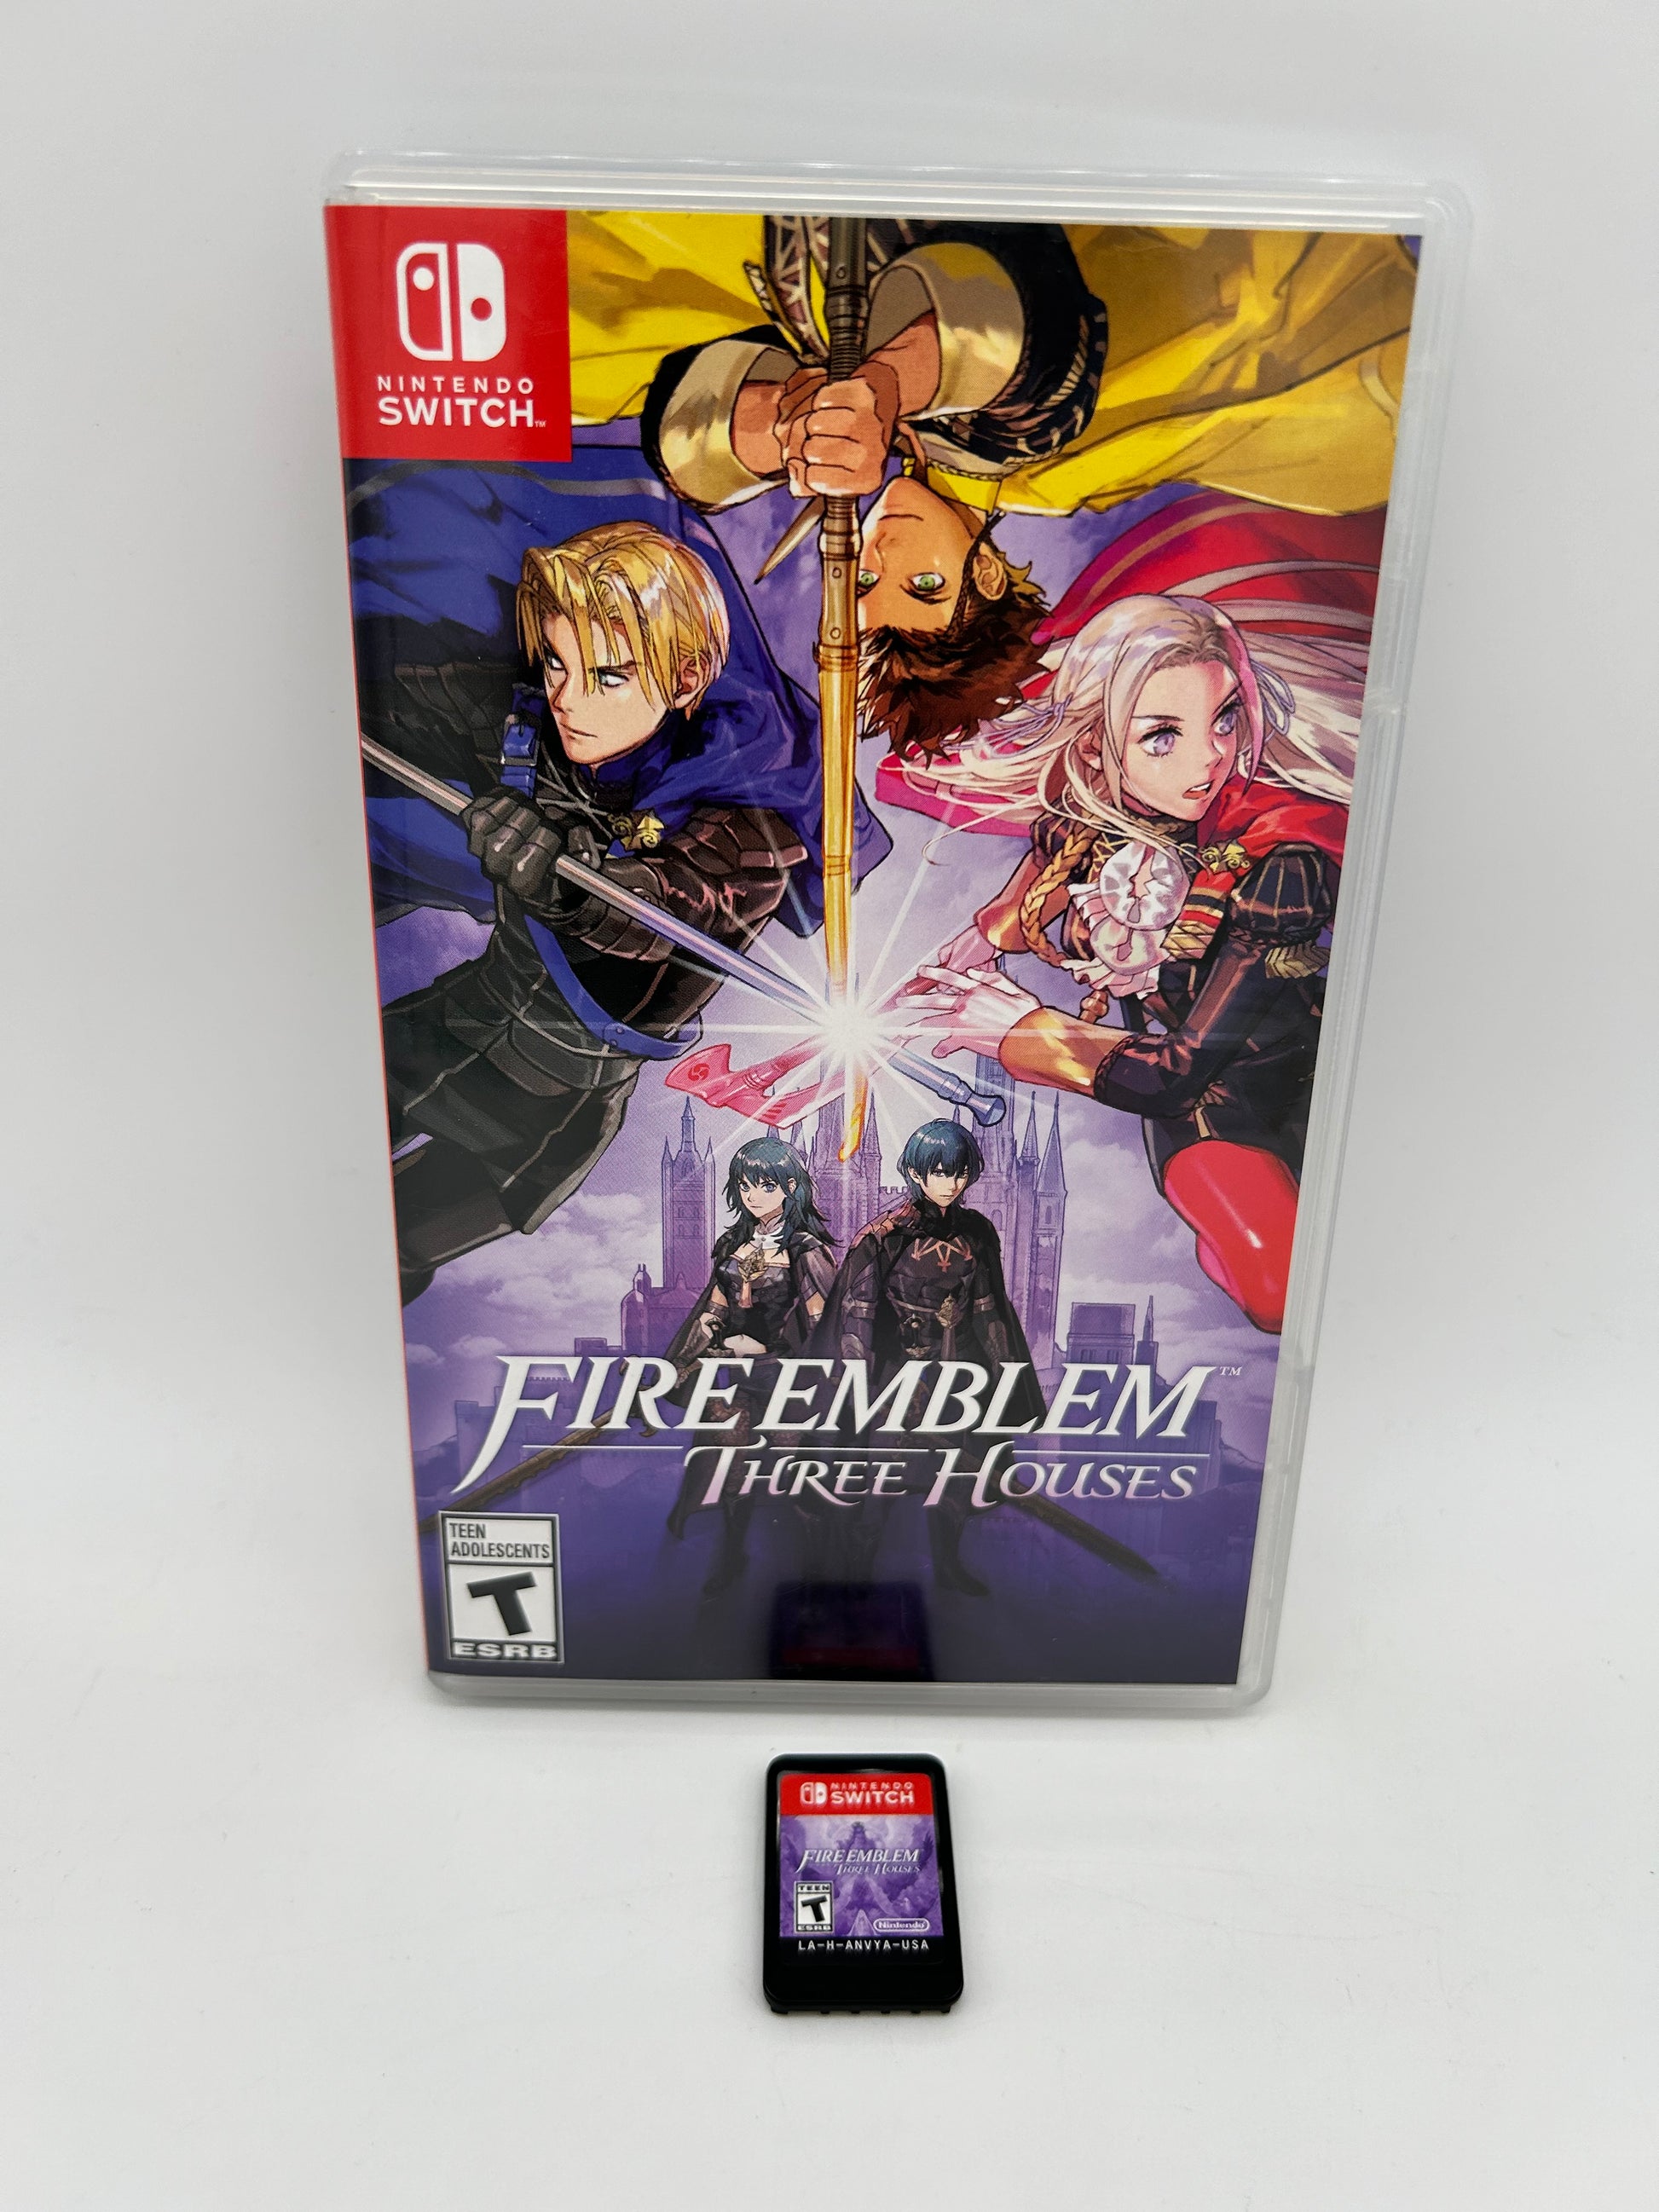 PiXEL-RETRO.COM : NINTENDO SWITCH NEW SEALED IN BOX COMPLETE MANUAL GAME NTSC FIRE EMBLEM THREE HOUSES